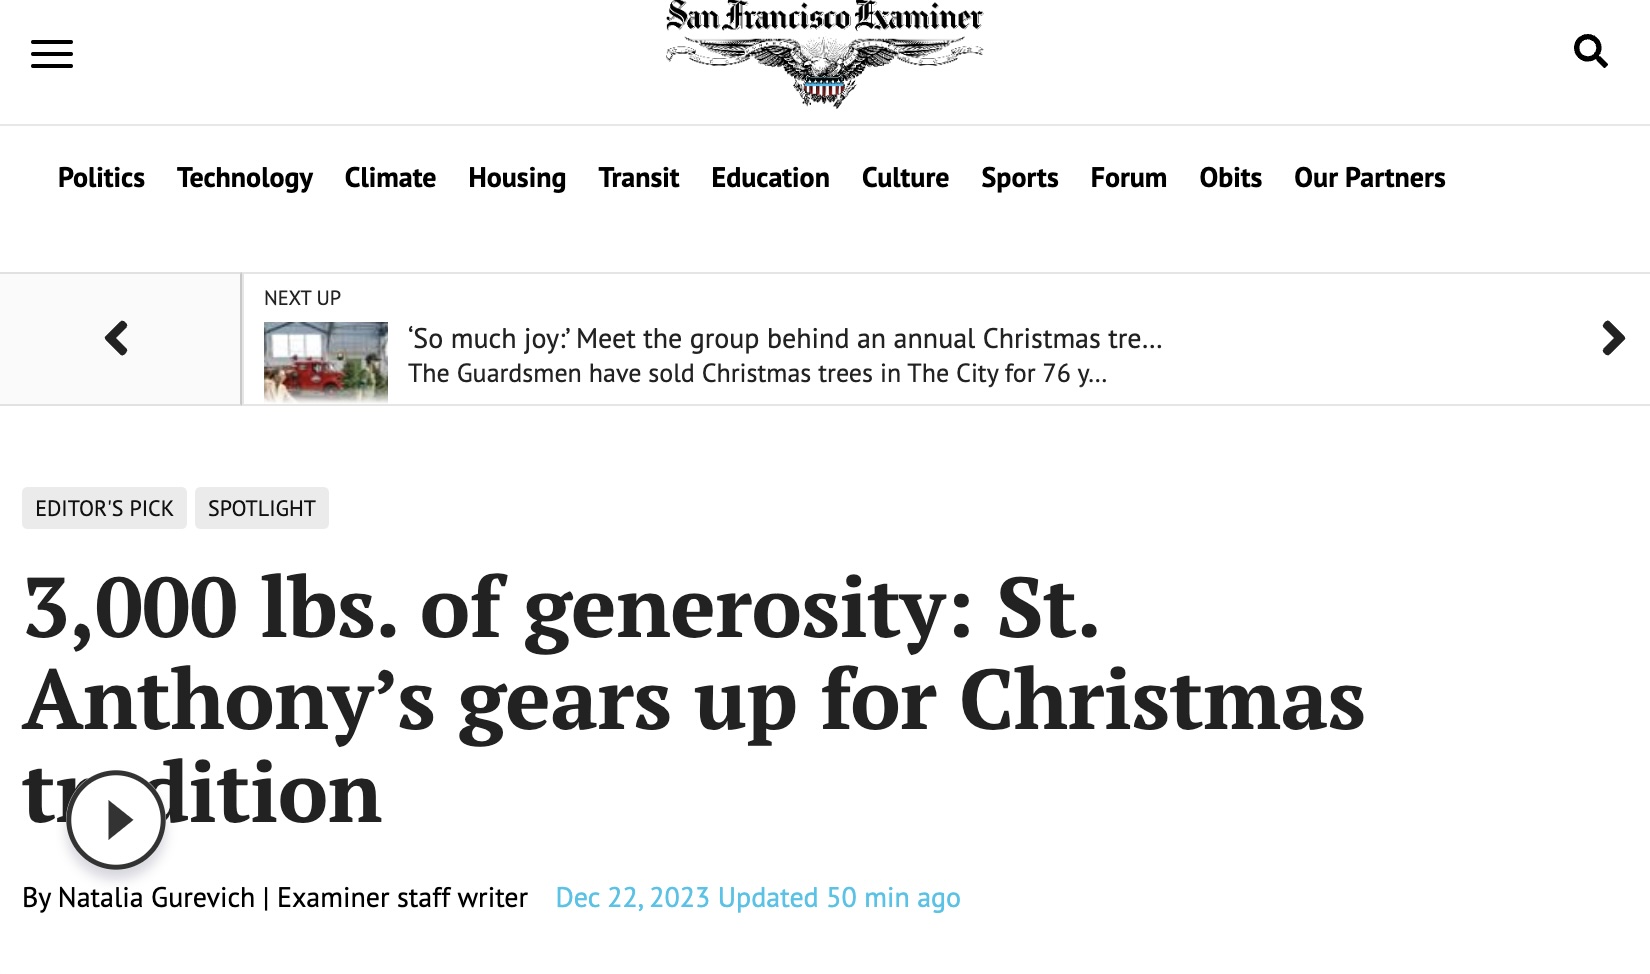 SF Examiner: 3,000 lbs. of generosity: St. Anthony’s gears up for Christmas tradition